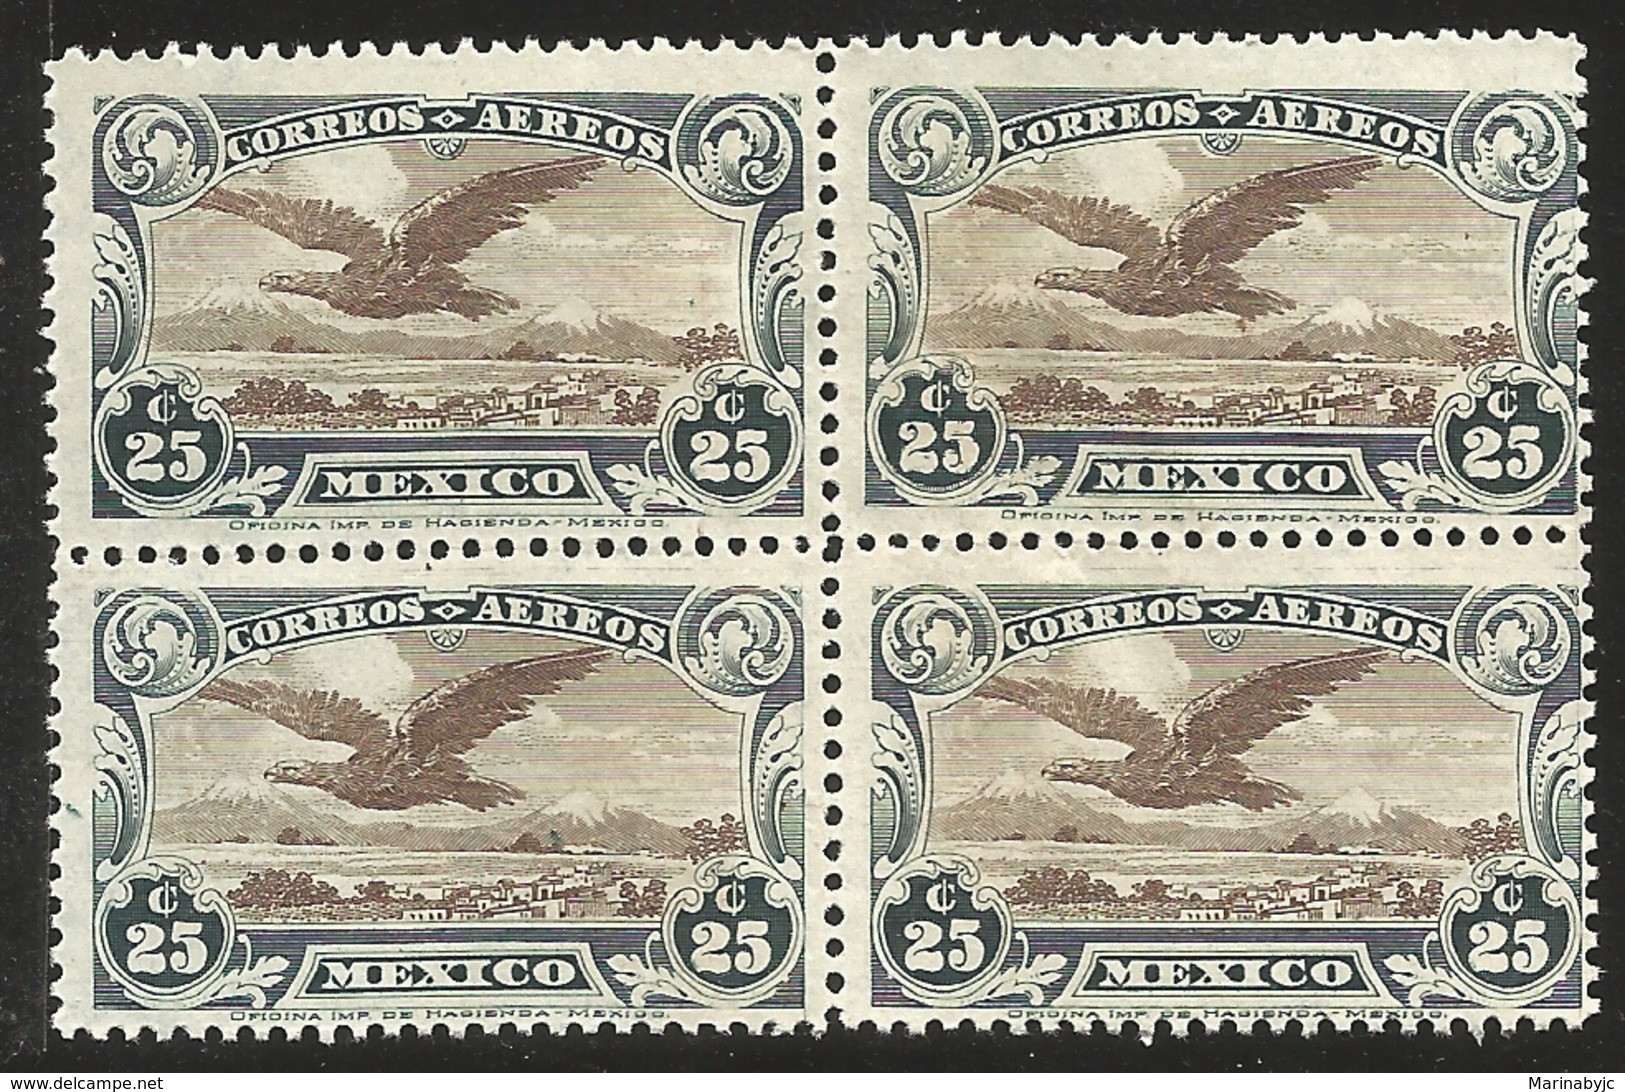 RJ) 1928 MEXICO, BLOCK OF 4, EAGLE FLYING OVER MOUNTAINS, SCOTT C4, MNH - Mexico